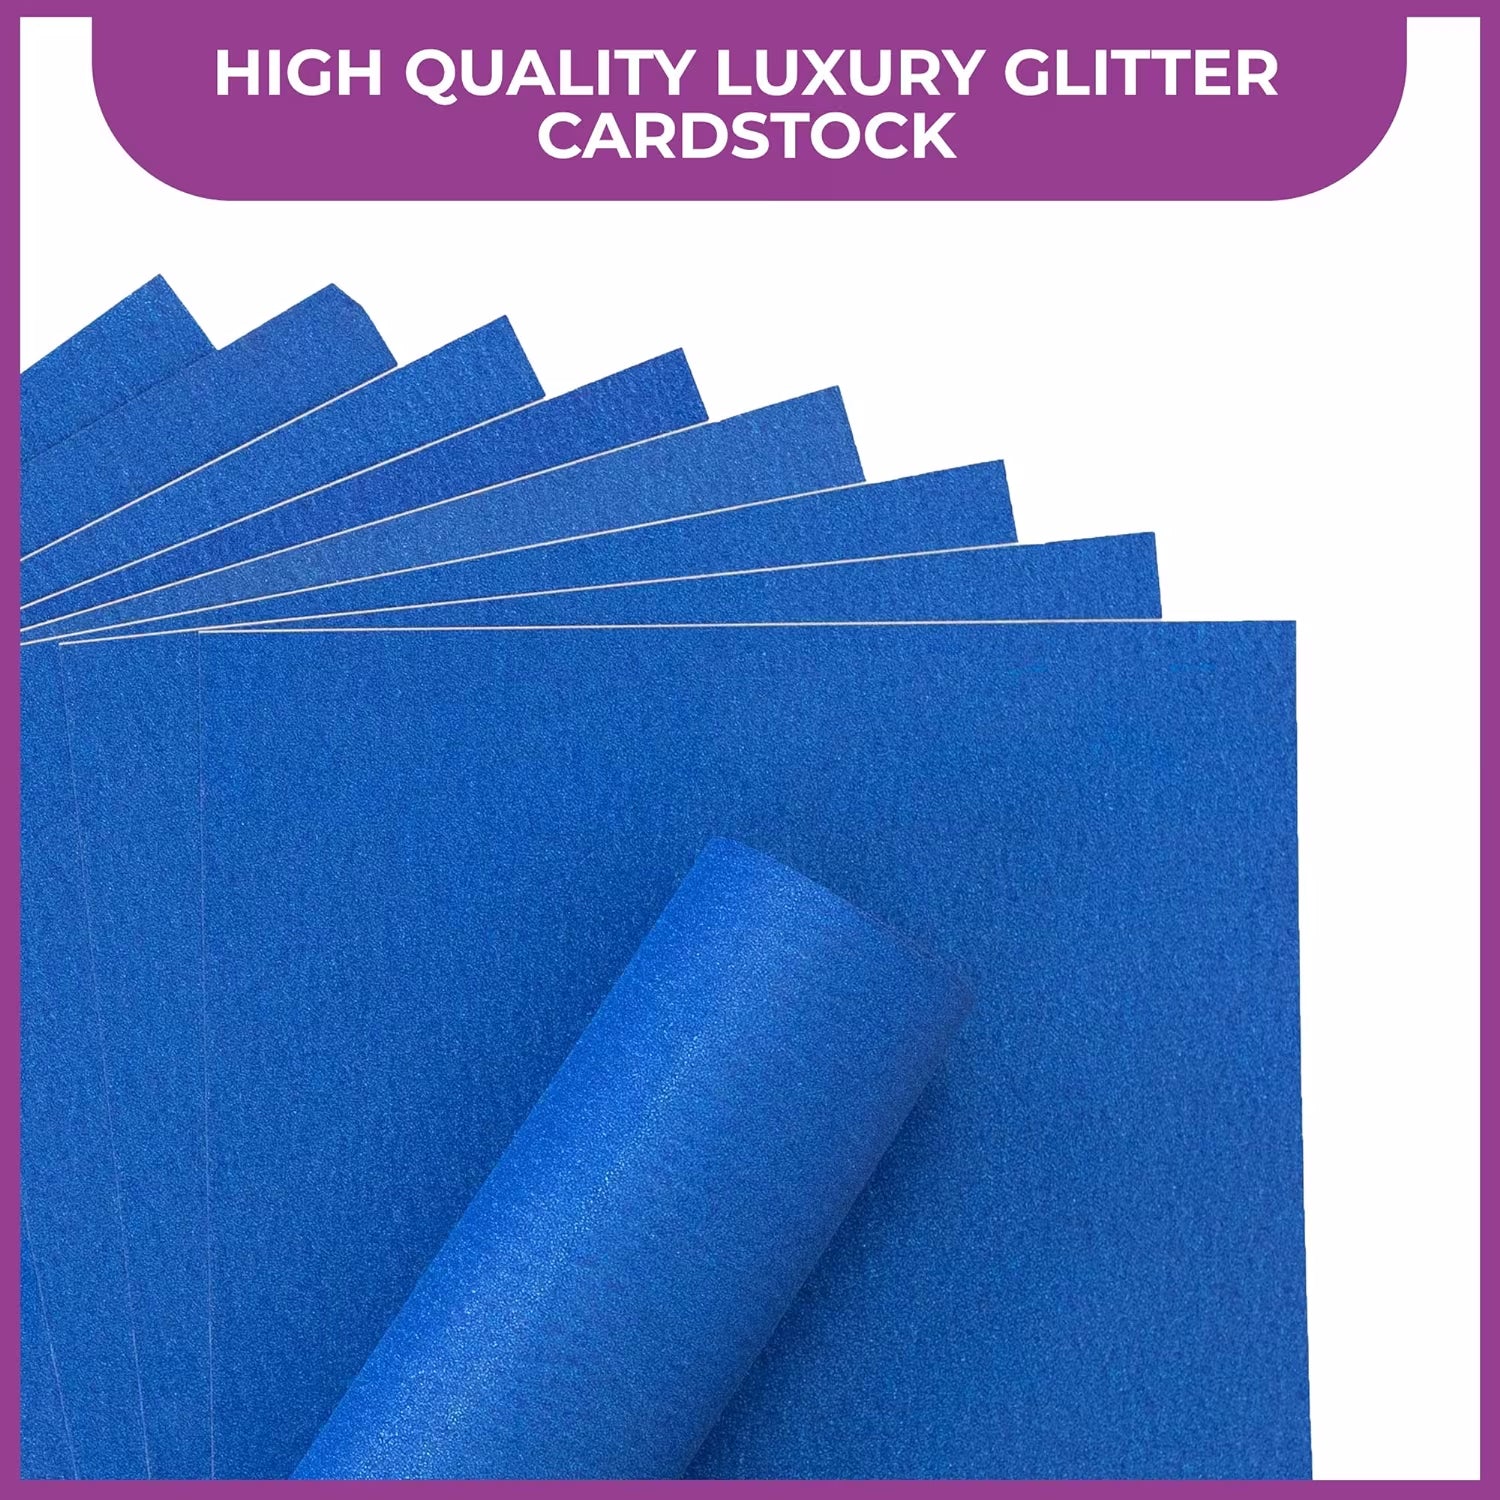 Crafter's Companion - A4 Glitter Card - 250gsm 10 Sheets - Royal Blue